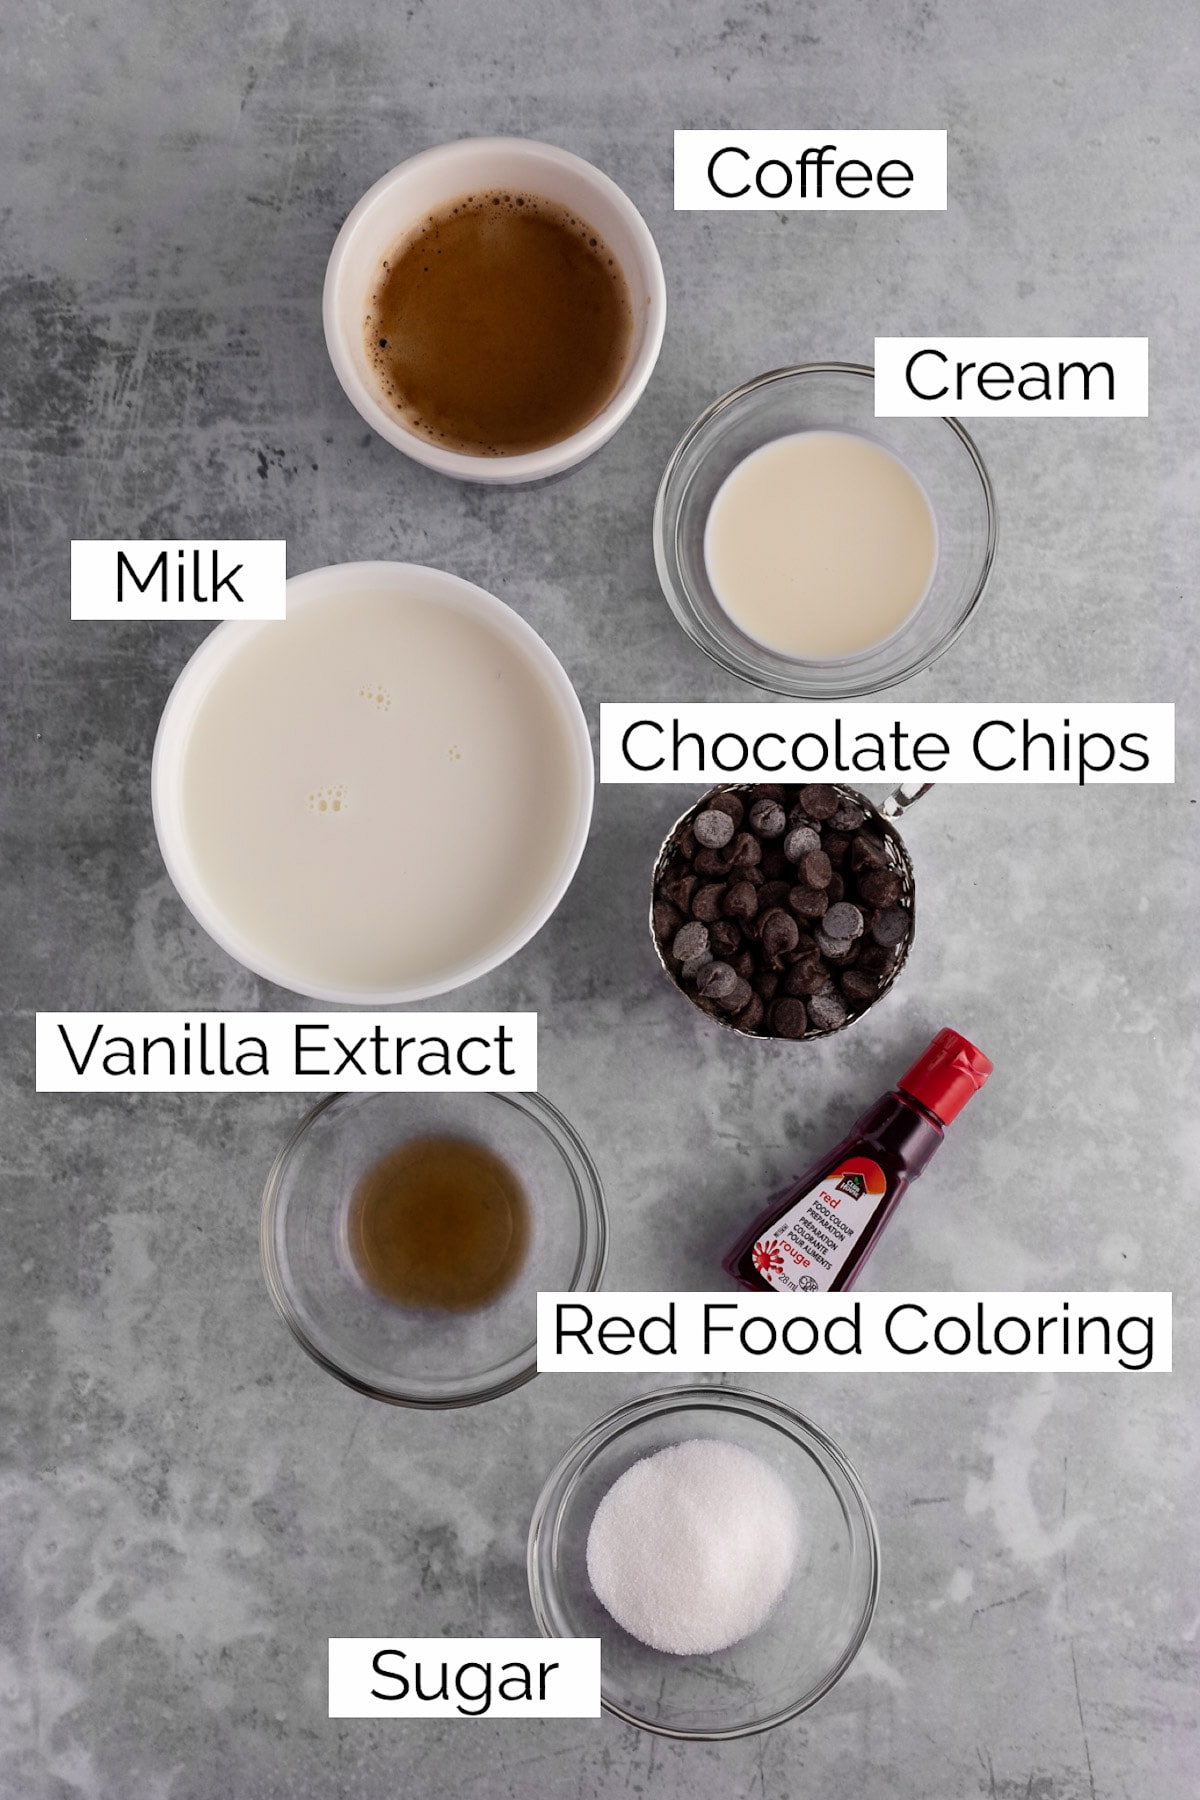 Overhead photo of the ingredients needed to make the latte.